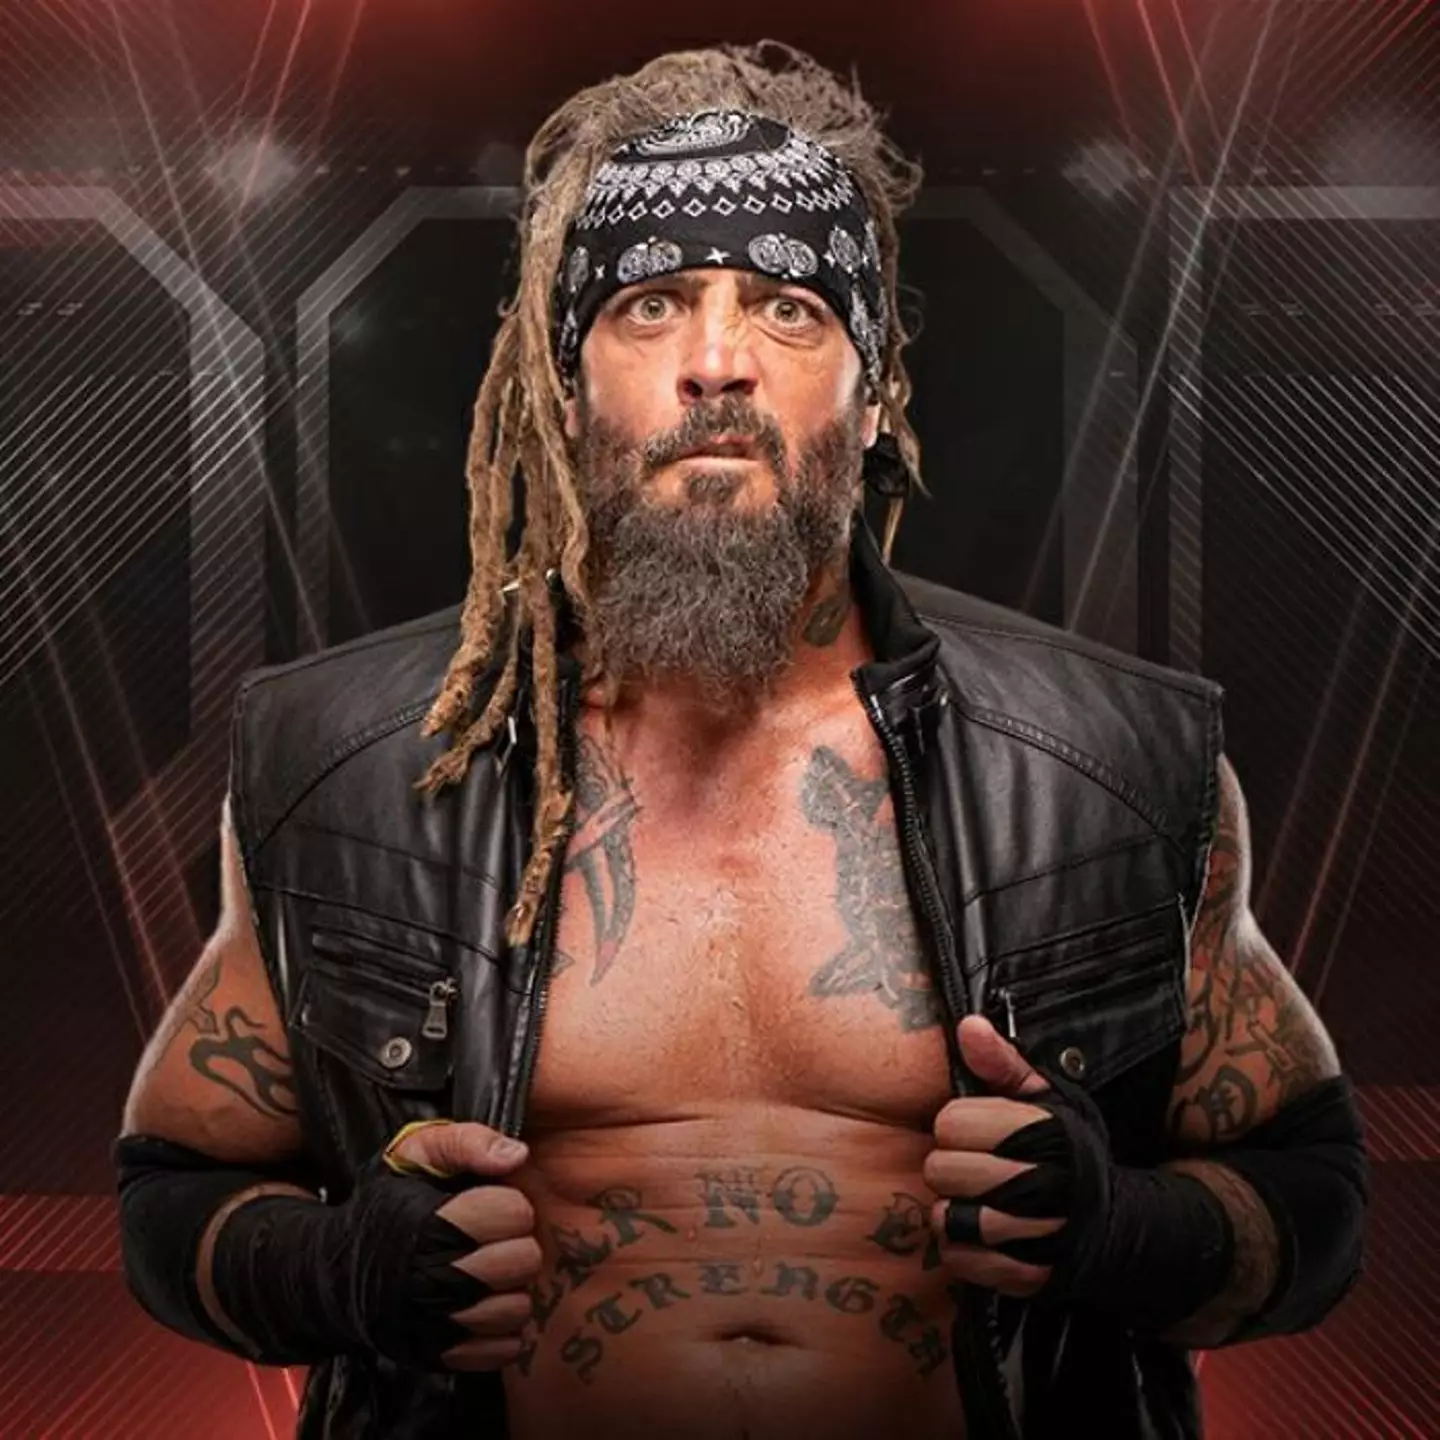 Ring of Honor legend Jay Briscoe has died a in car crash at the age of 38.